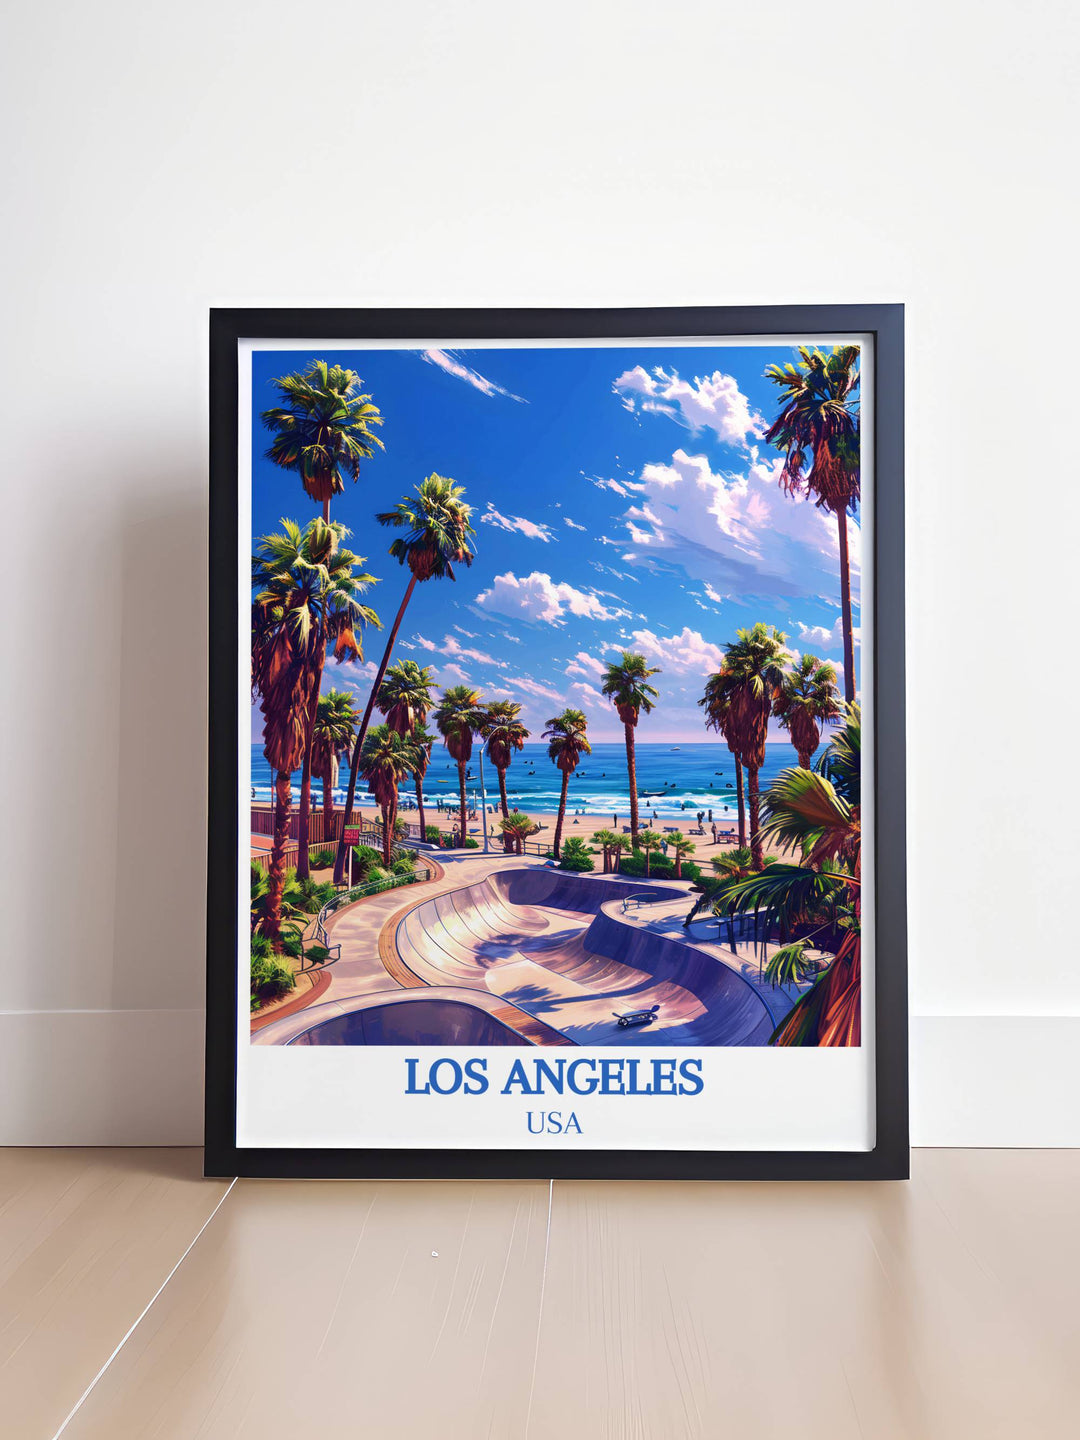 Los Angeles city art, highlighting modern architecture and bustling street life.